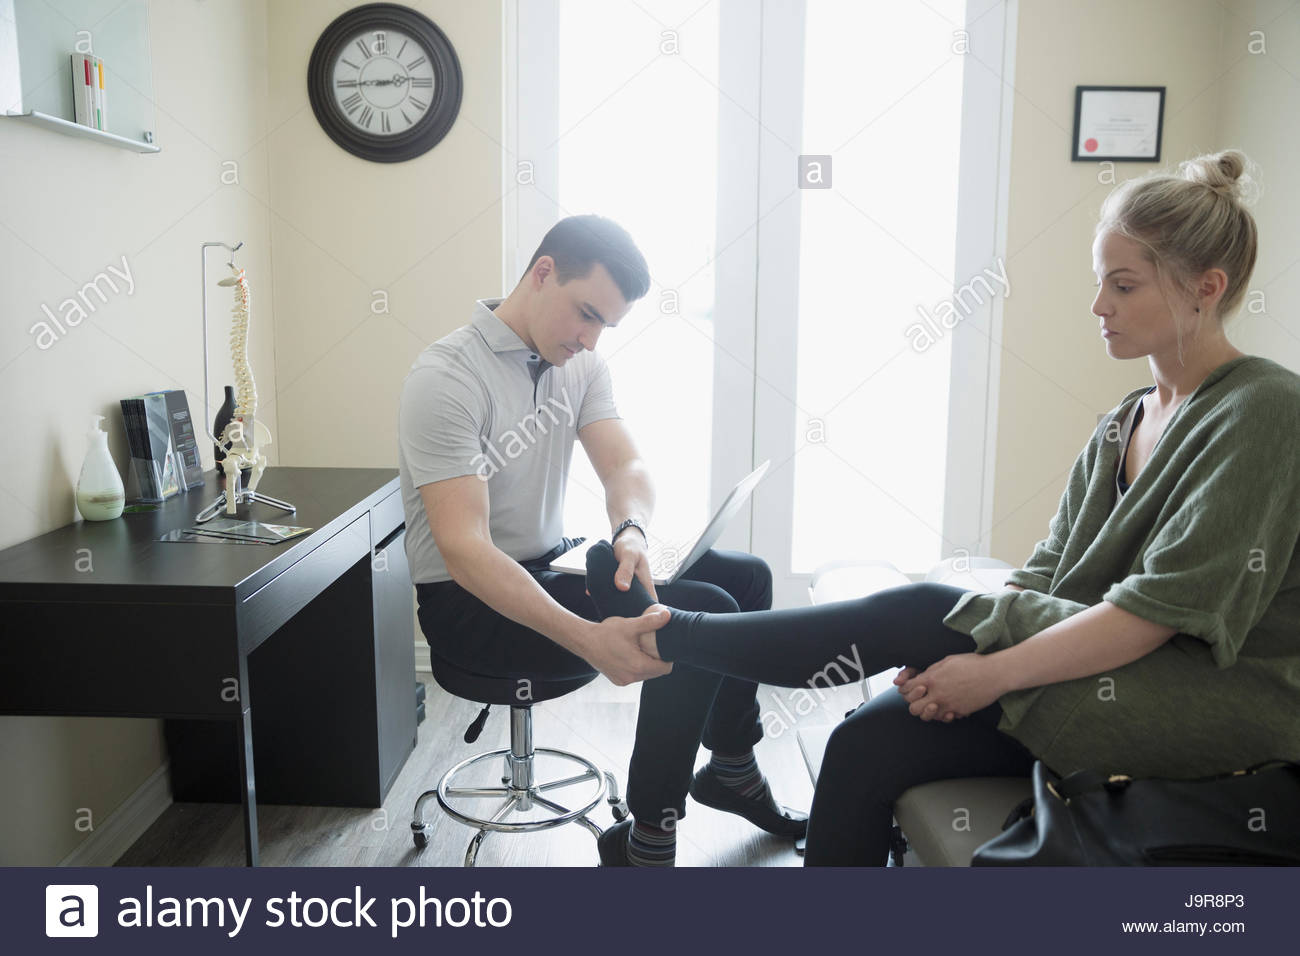 Male physiotherapist examining ankle of woman in clinic examination room Stock Photo